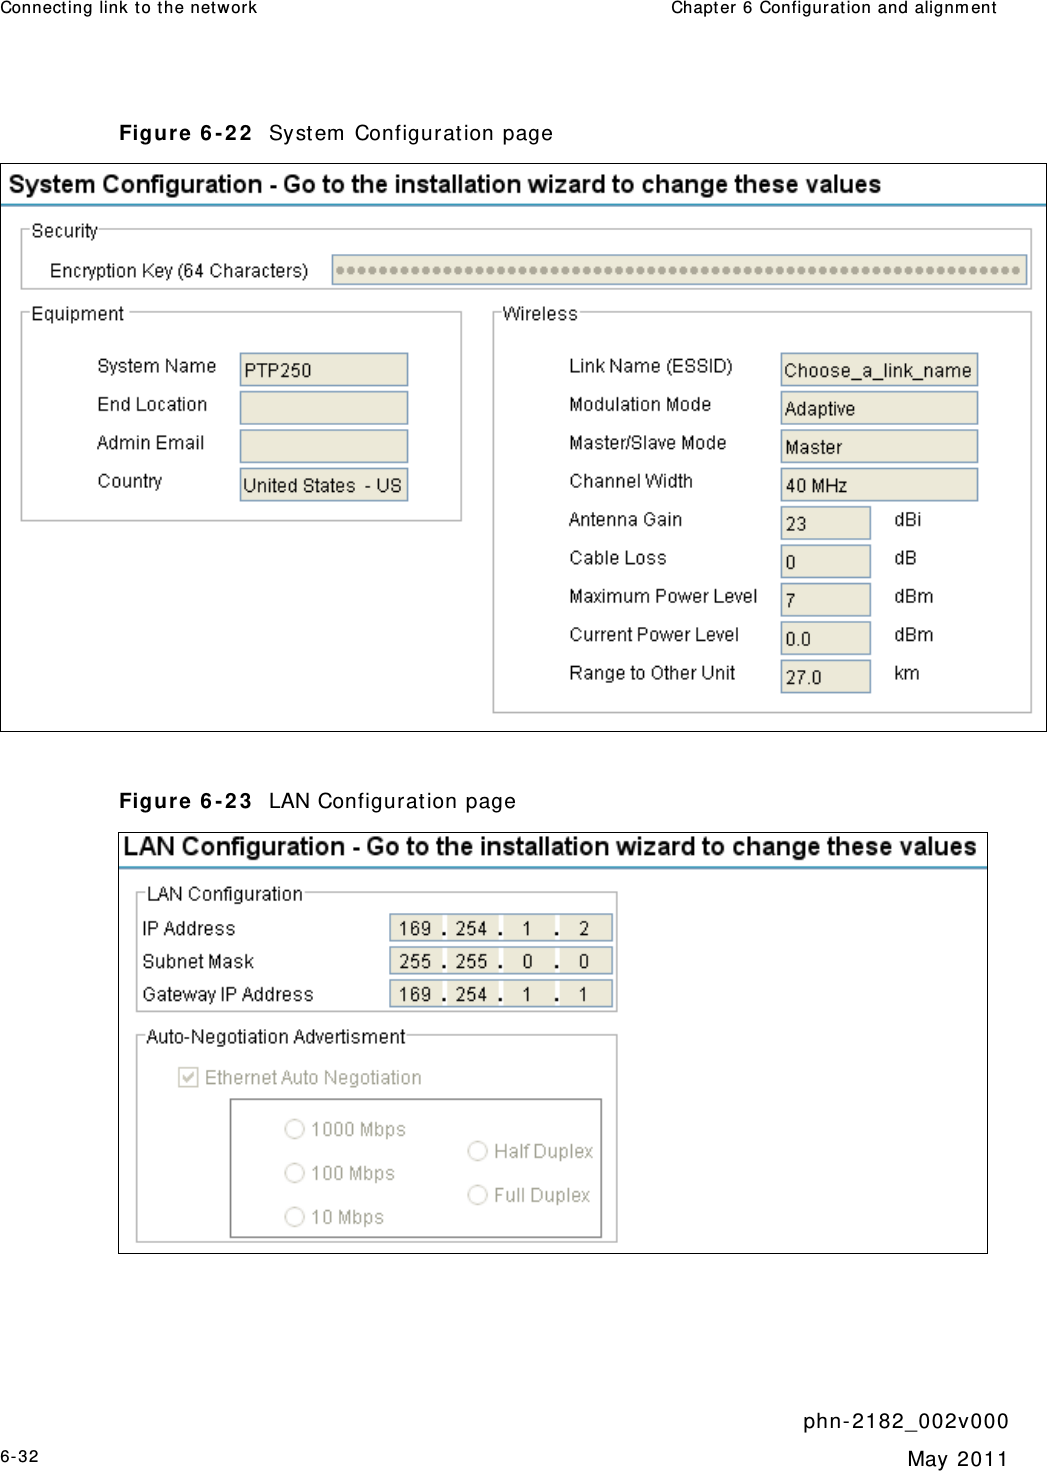 Connect ing link t o t he network  Chapt er 6 Configurat ion and alignm ent      phn- 2 182_002v 000 6-32  May 2011  Figure 6 - 2 2   Syst em  Configuration page   Figure 6 - 2 3   LAN Configuration page  